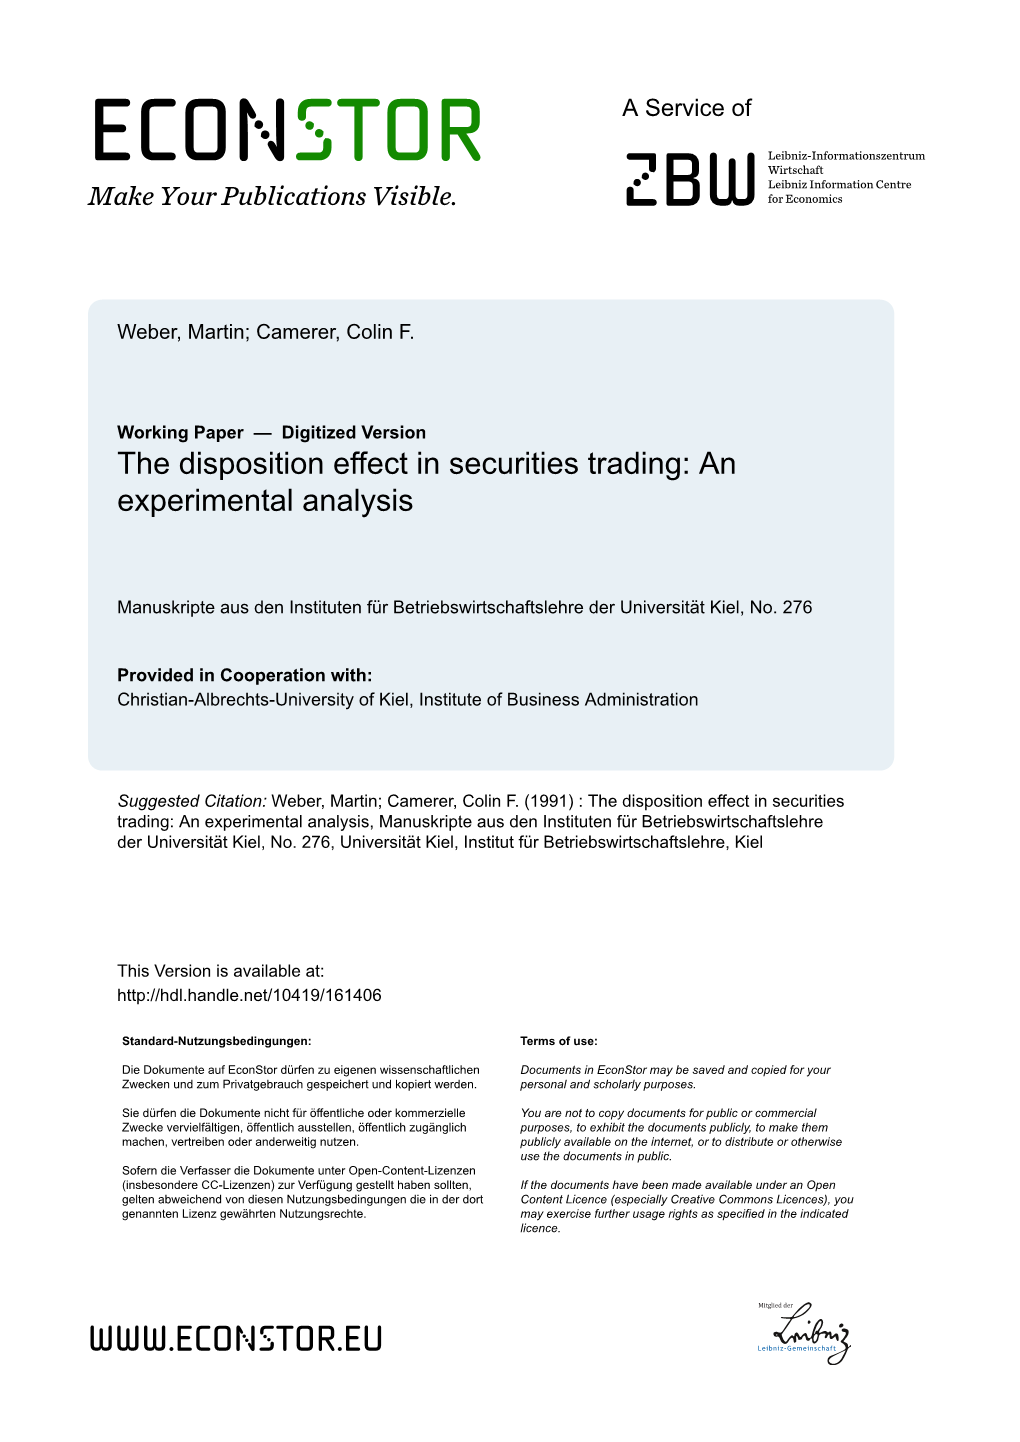 Disposition Effect in Securities Trading: an Experimental Analysis